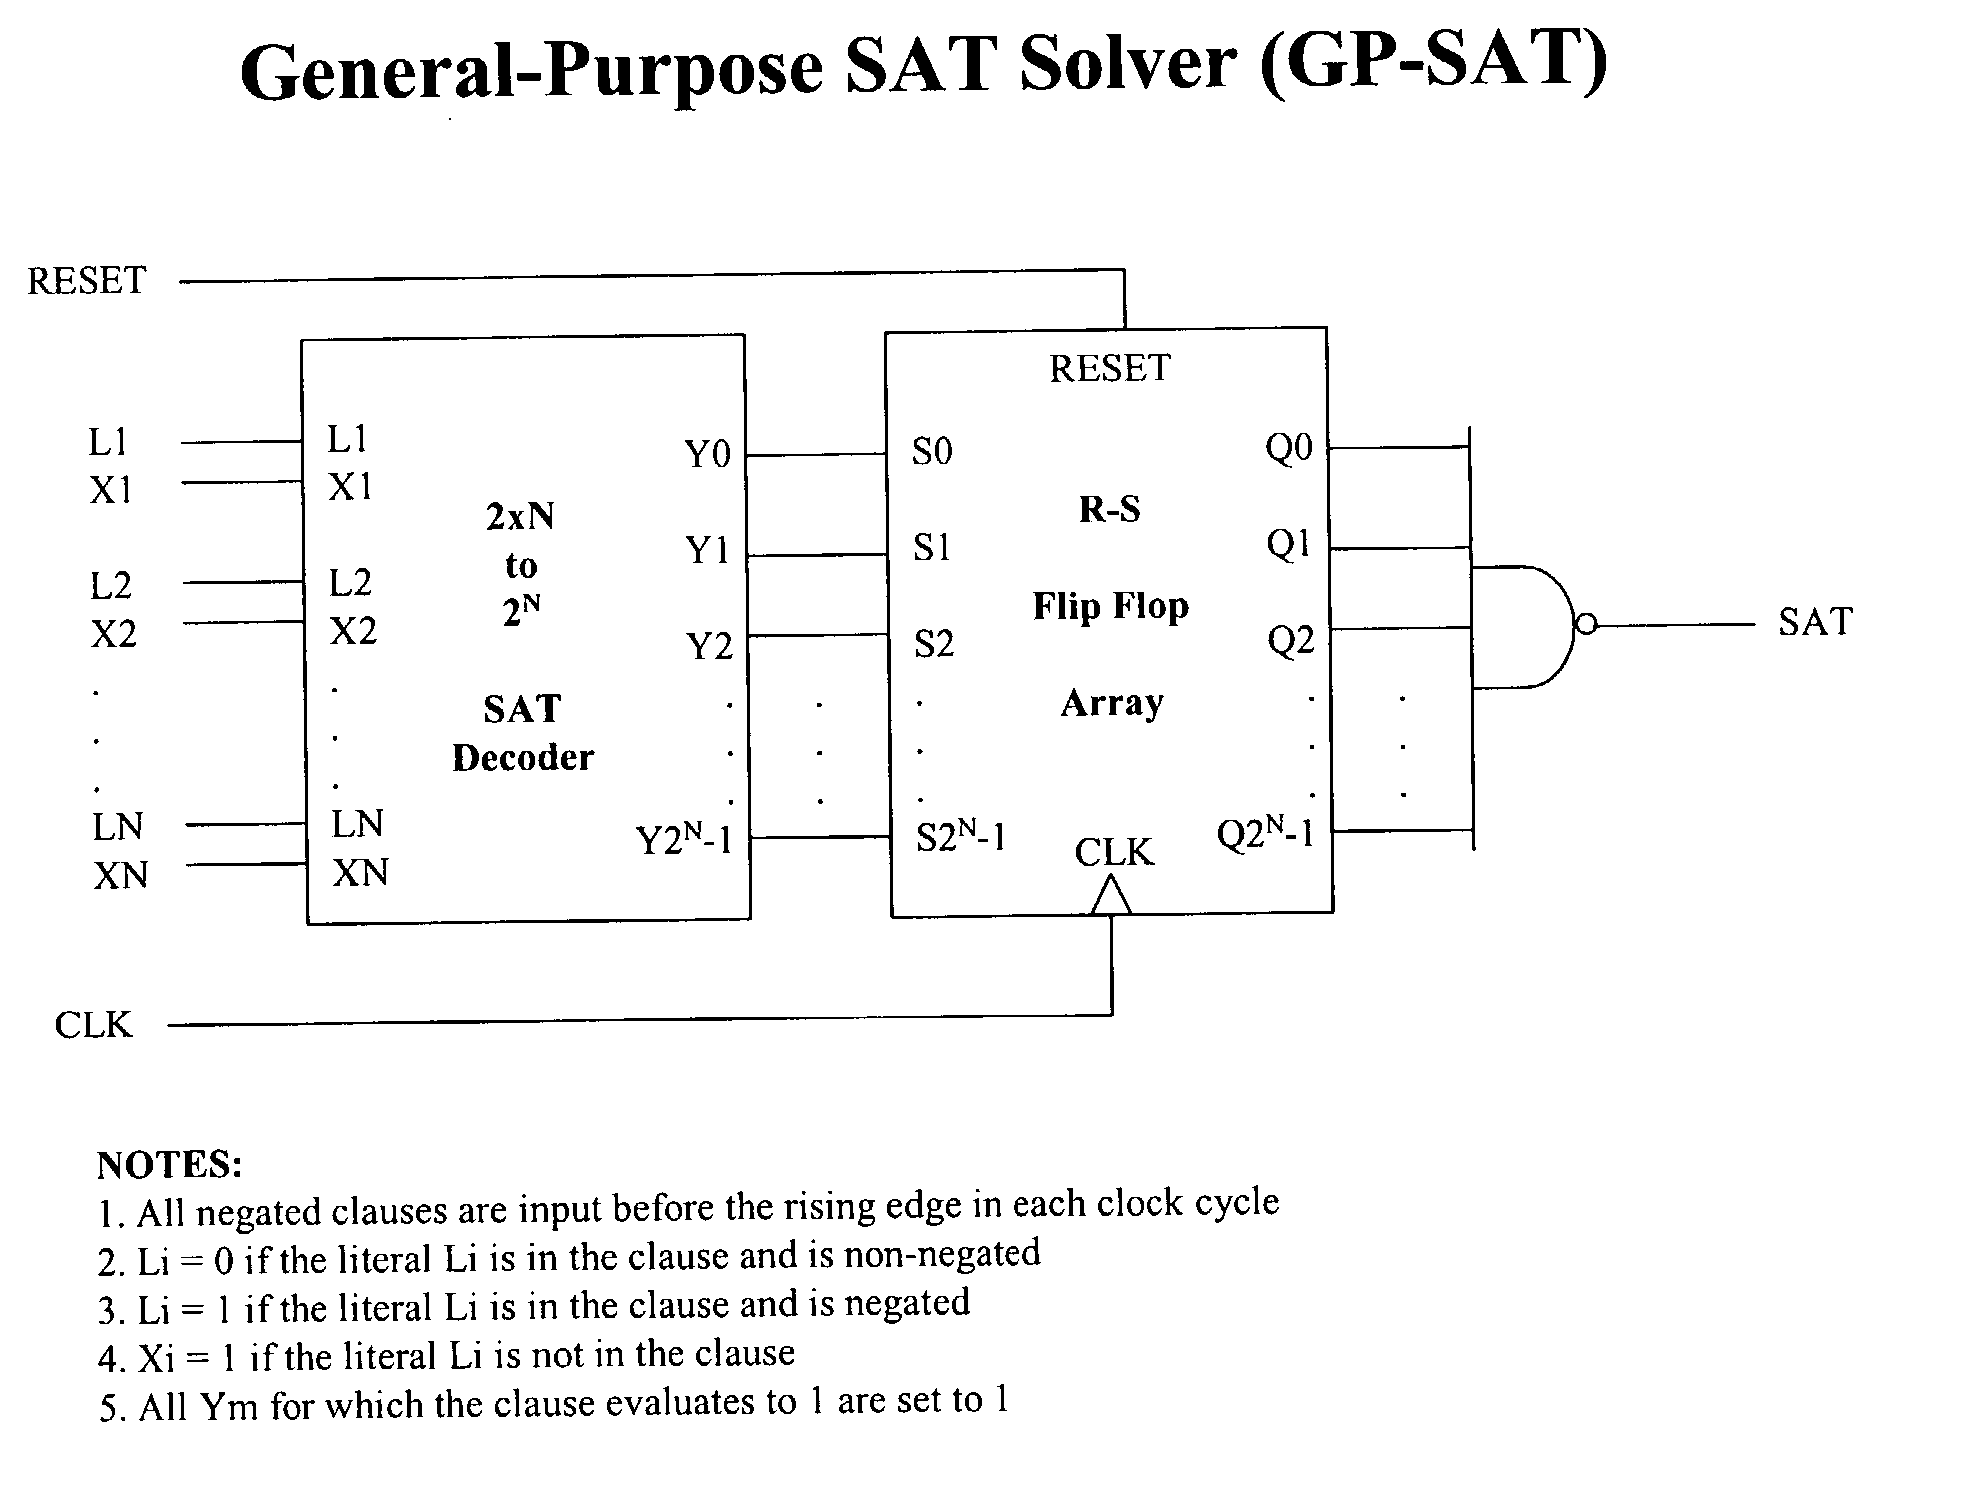 General-purpose sequential machine for solving boolean satisfiability (SAT) problems in linear time